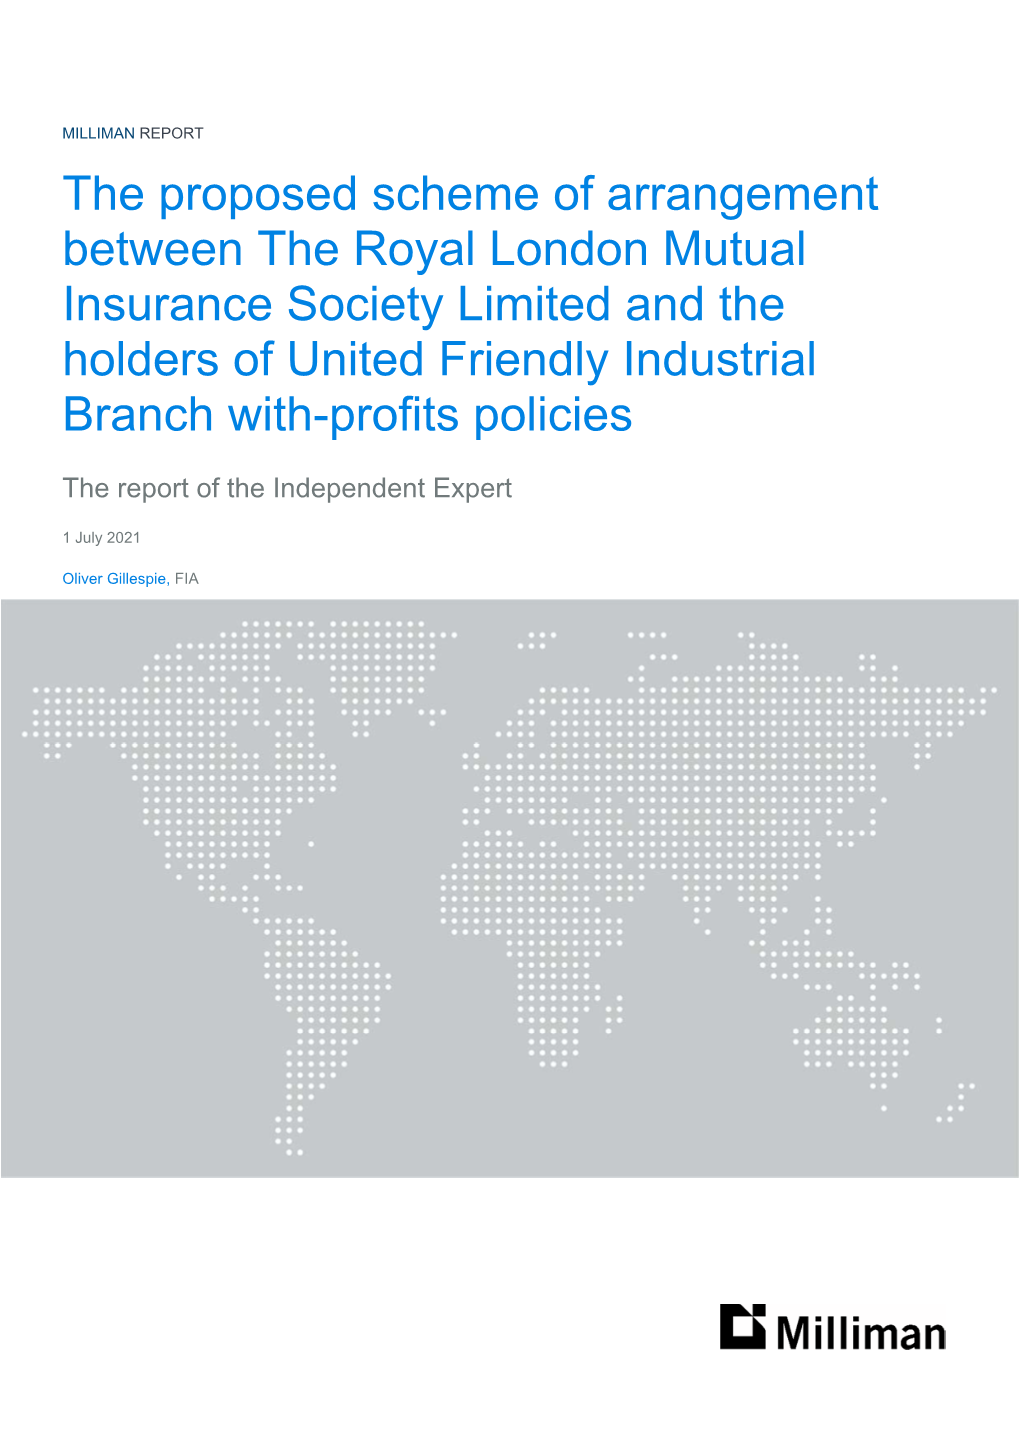 The Proposed Scheme of Arrangement Between the Royal London Mutual